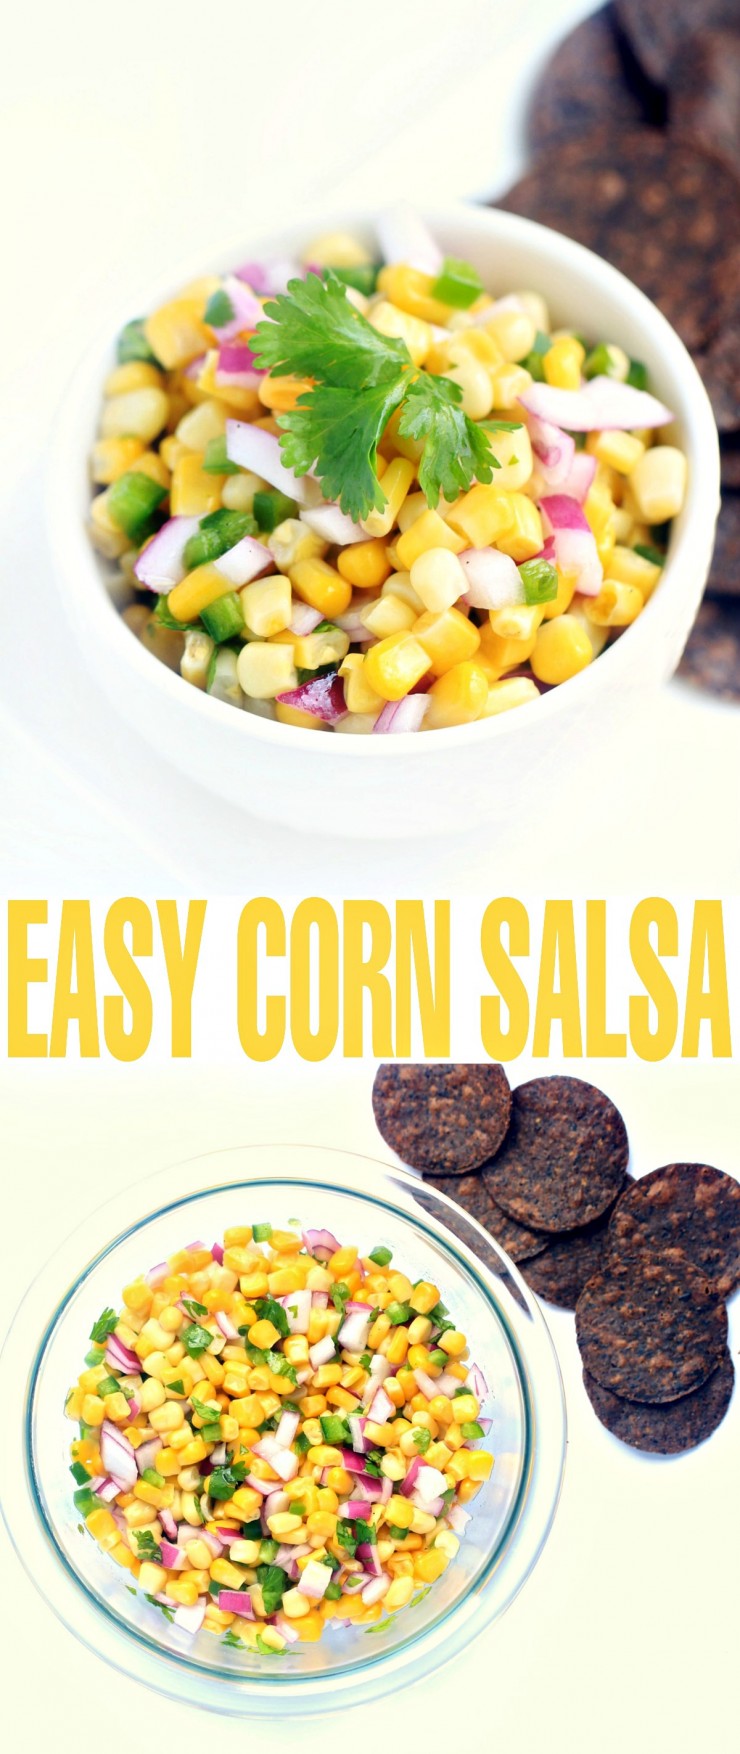 This easy corn salsa recipe will be your new party staple - serve with tortilla chips or with tacos as a delicious condiment.